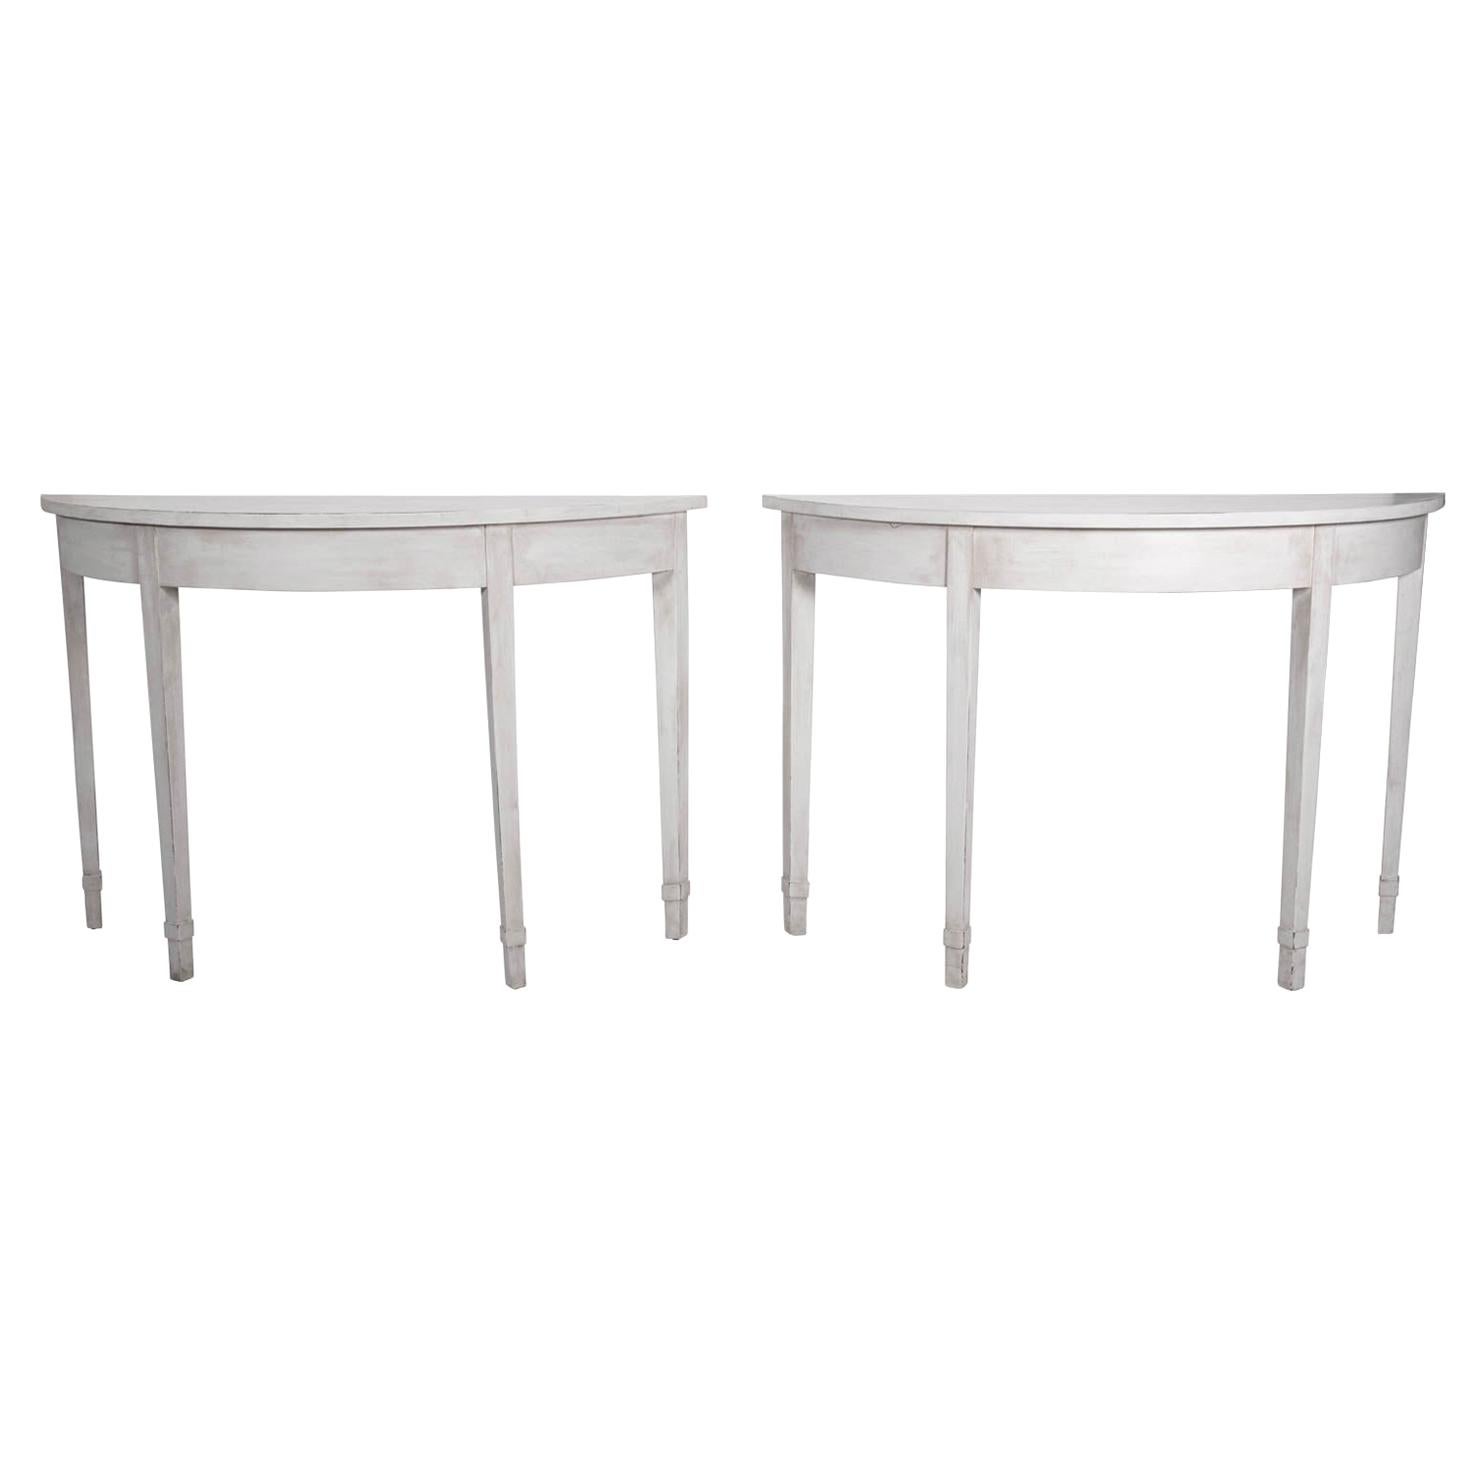 Pair of Gustavian White Painted Demilune Table